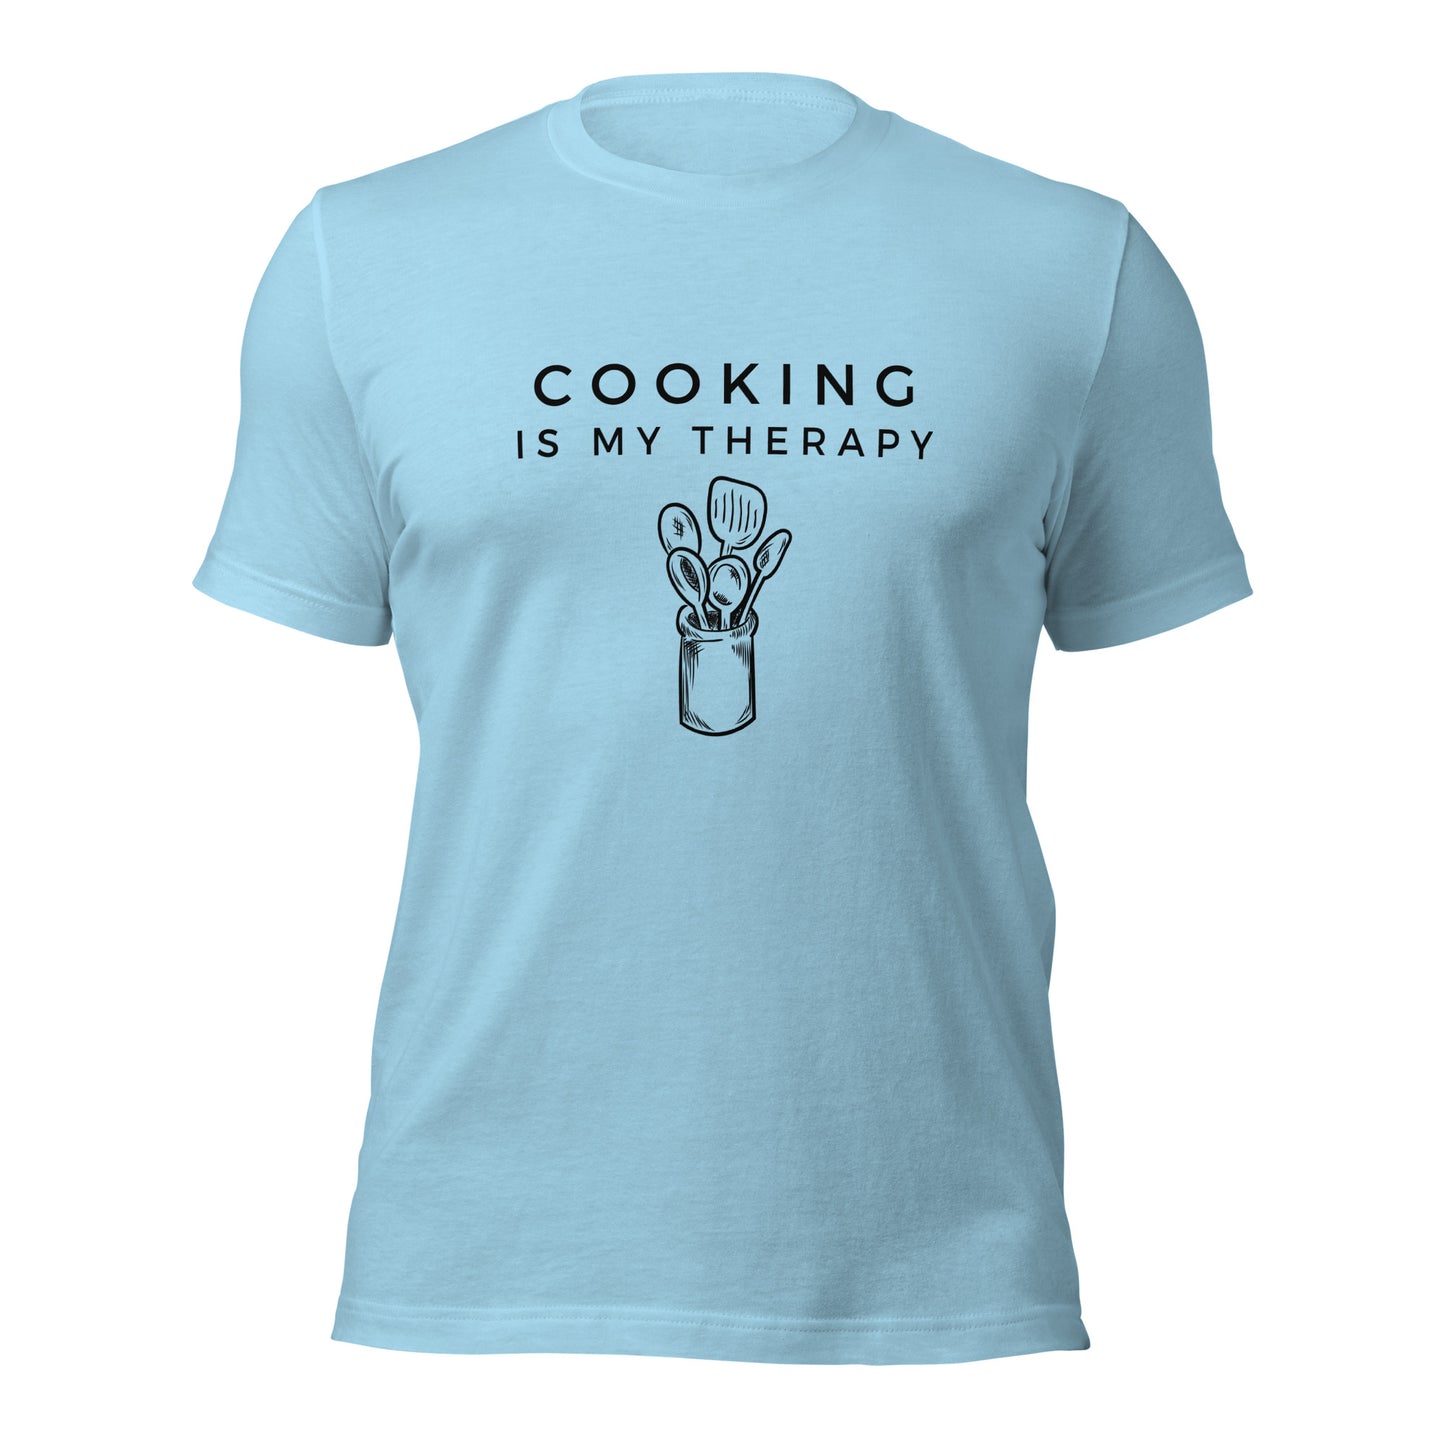 Durable kitchenwear "Cooking Is My Therapy" cotton tee